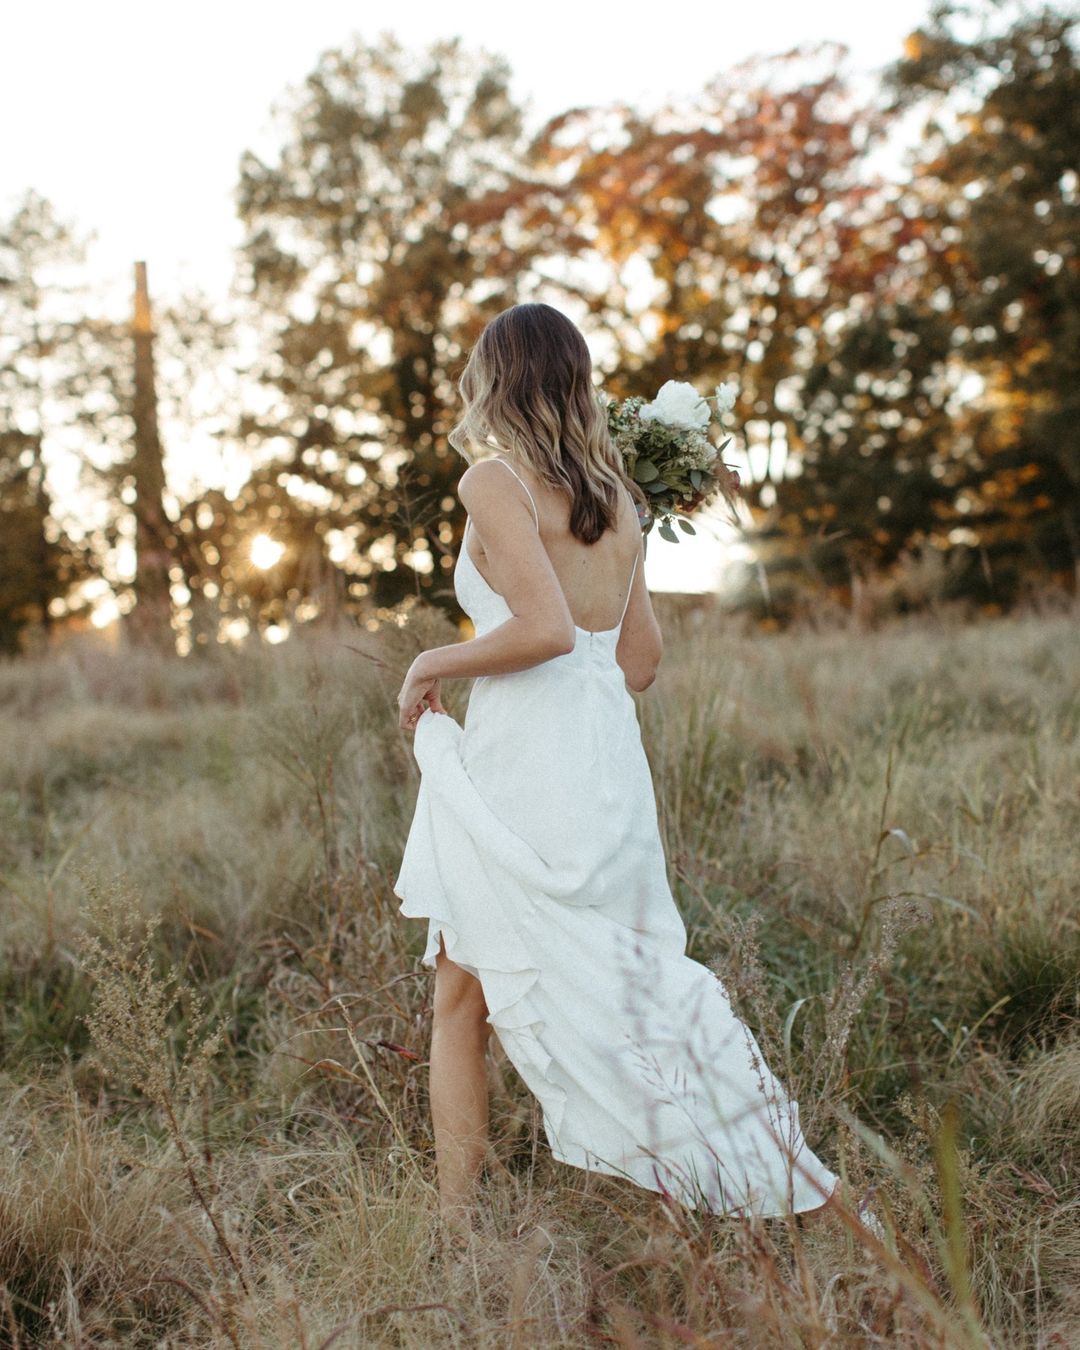 wedding dresses to wear with cowboy boots ideas